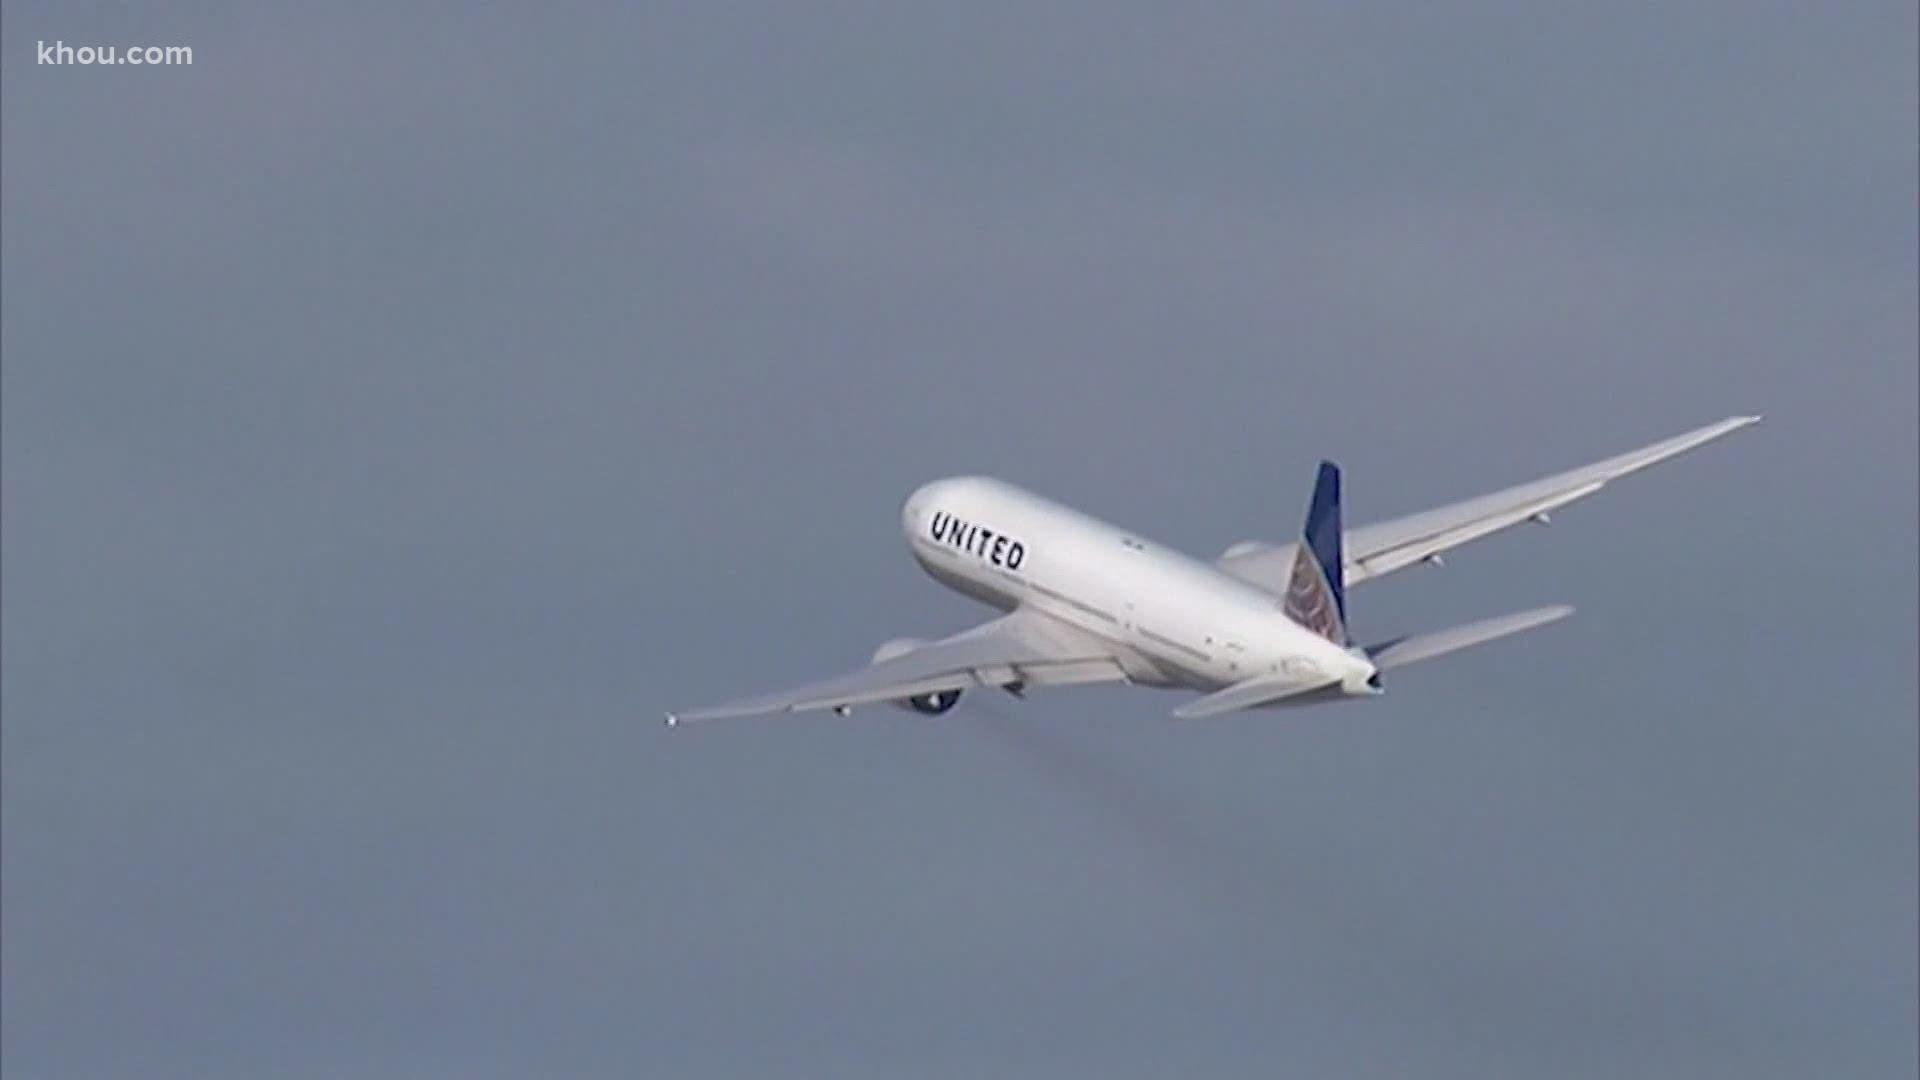 United says it employs 14,000 Houston-area workers but isn't sure how many will be affected by the furloughs.